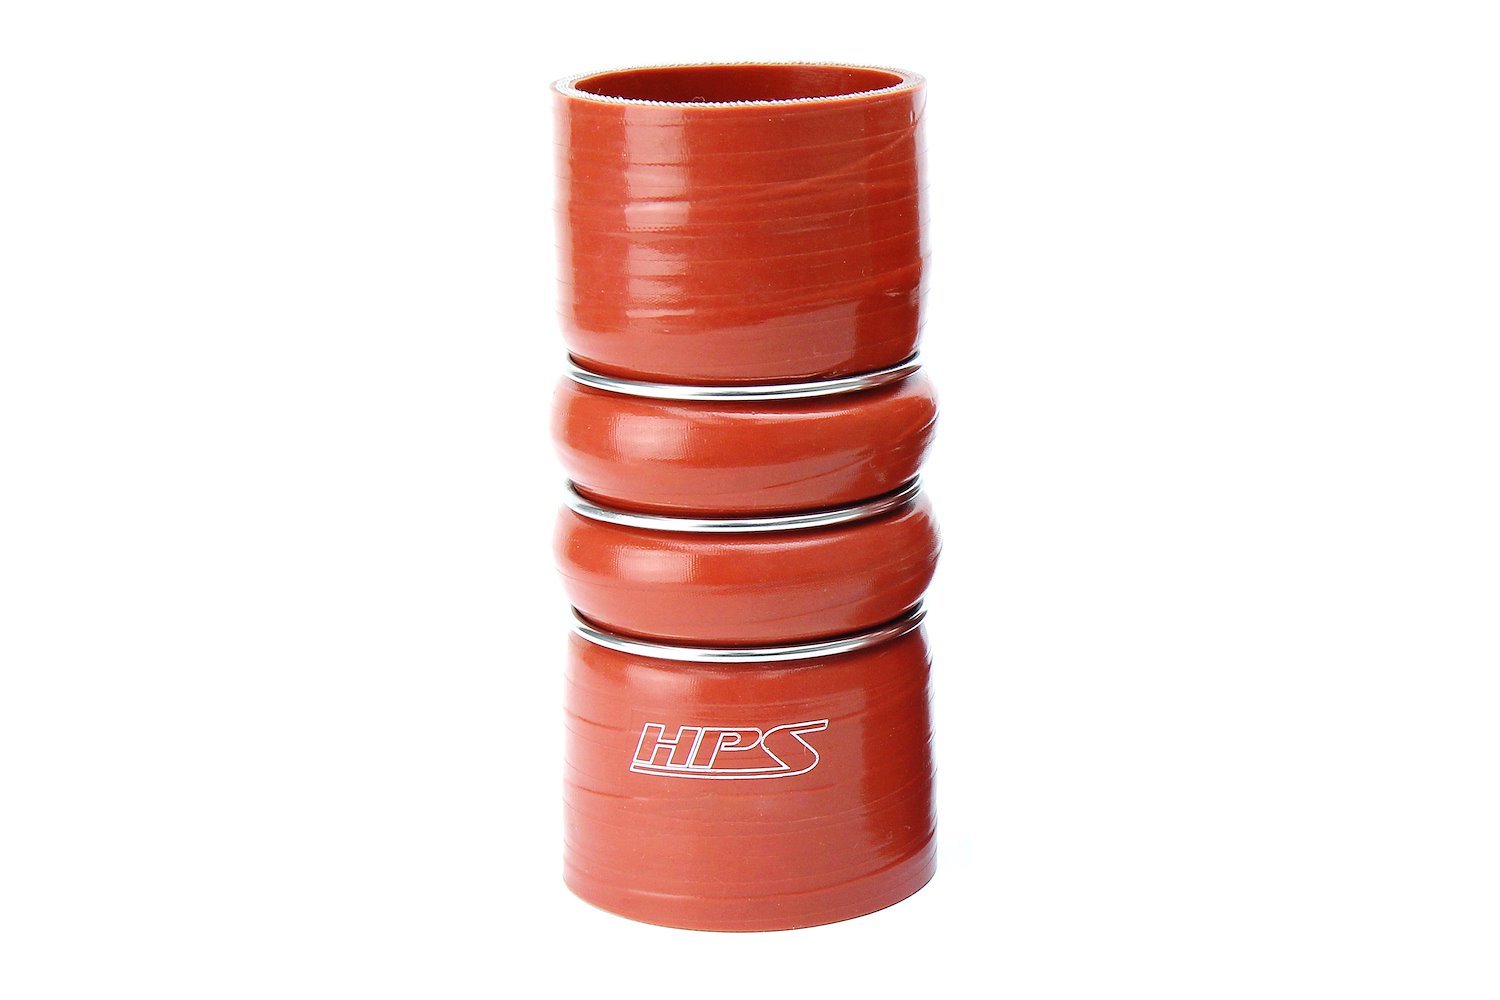 CAC-400-L8-HOT Silicone CAC Hose, Silicone CAC Hump Hose Hot, High-Temp 4-Ply Aramid Reinforced, 4 in. ID, 8 in. Long